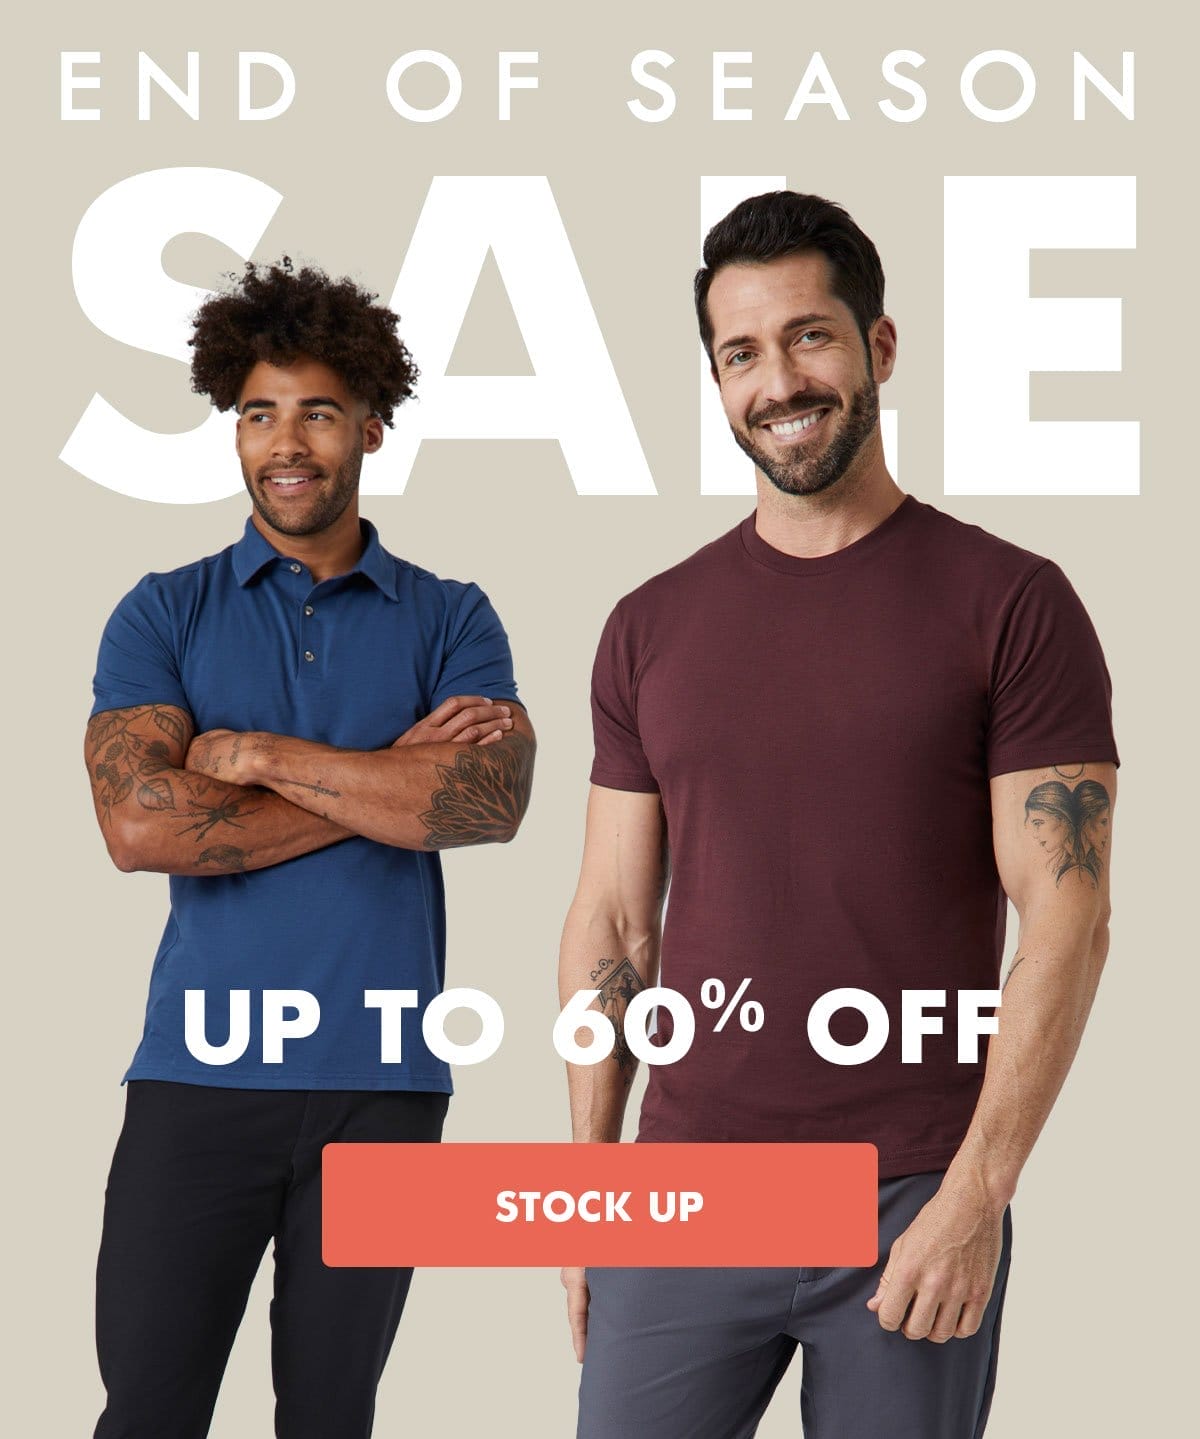 END OF SEASON SALE. UP TO 60% OFF.